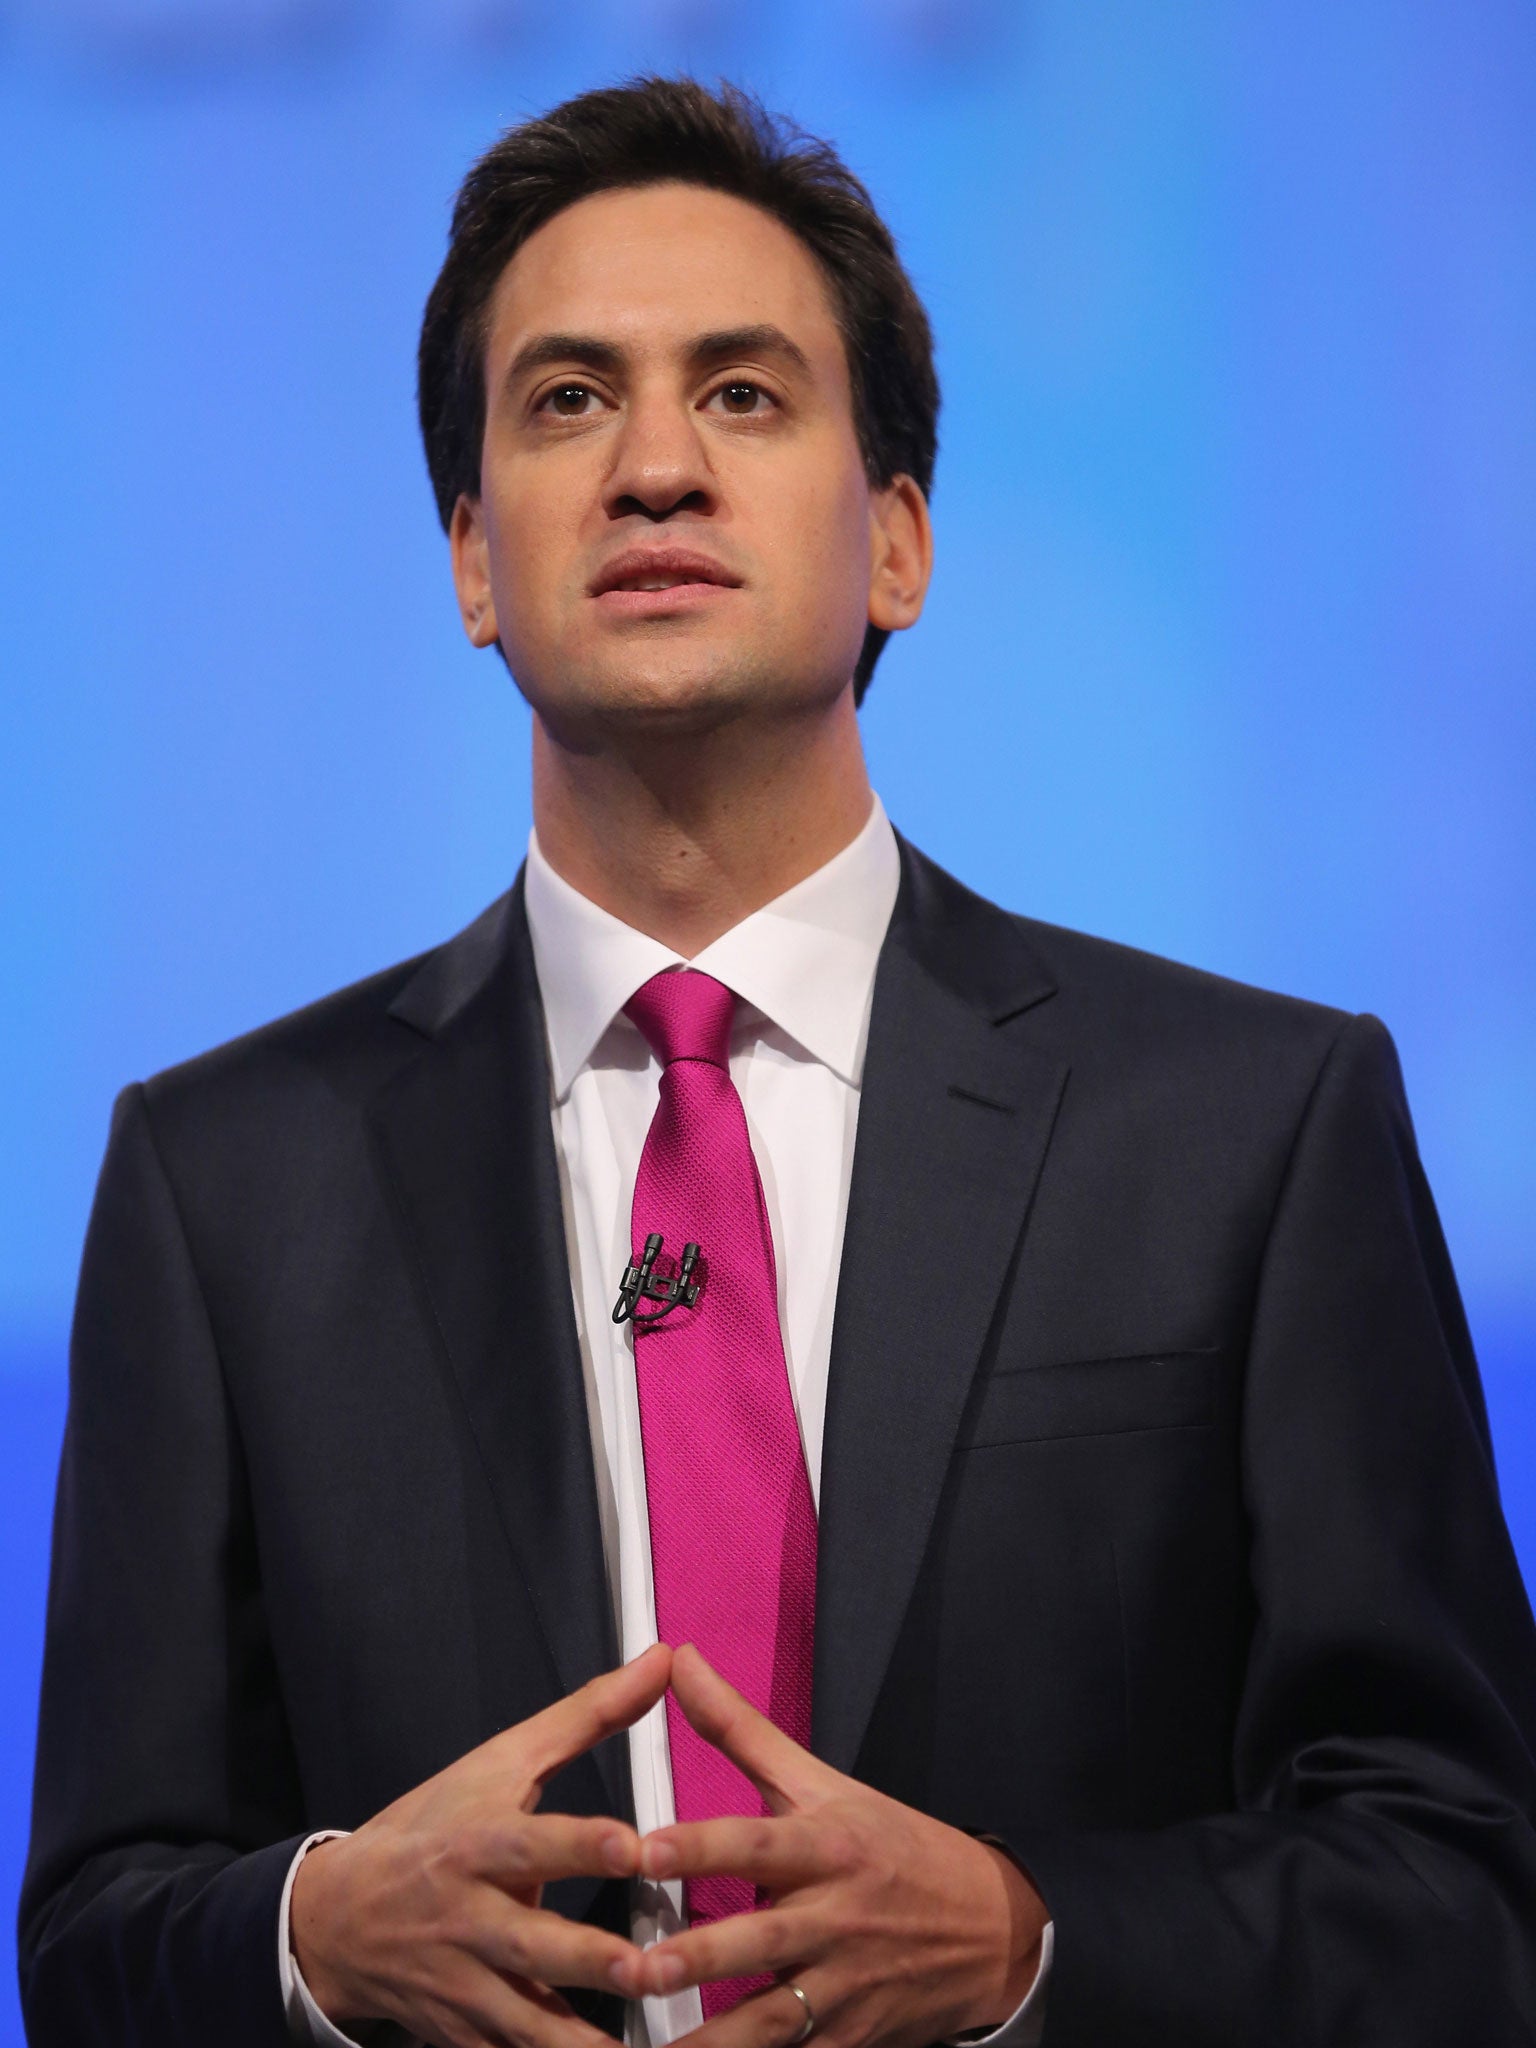 Ed Miliband wants union members to opt in to joining Labour rather than being automatically affiliated